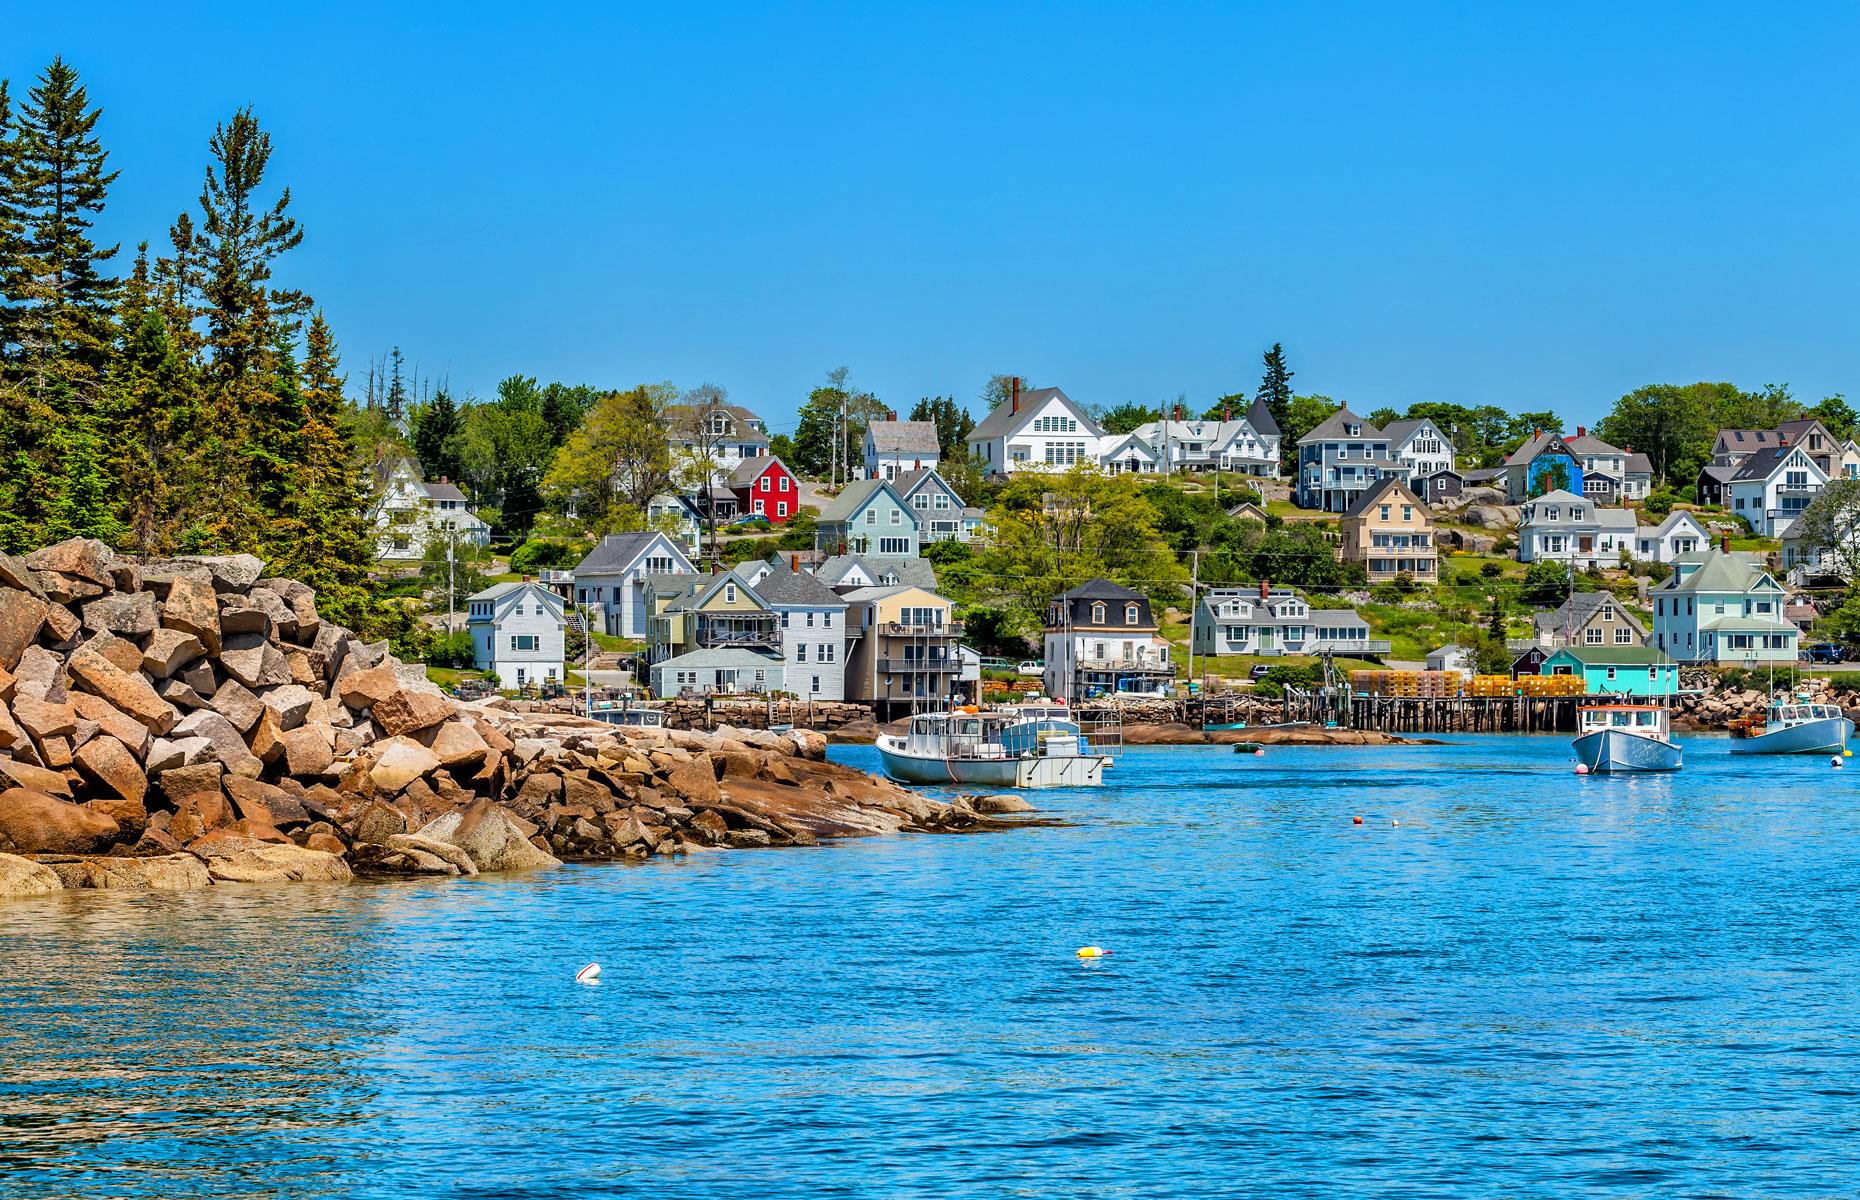 35. Maine, overall state tax rate: 11.81%